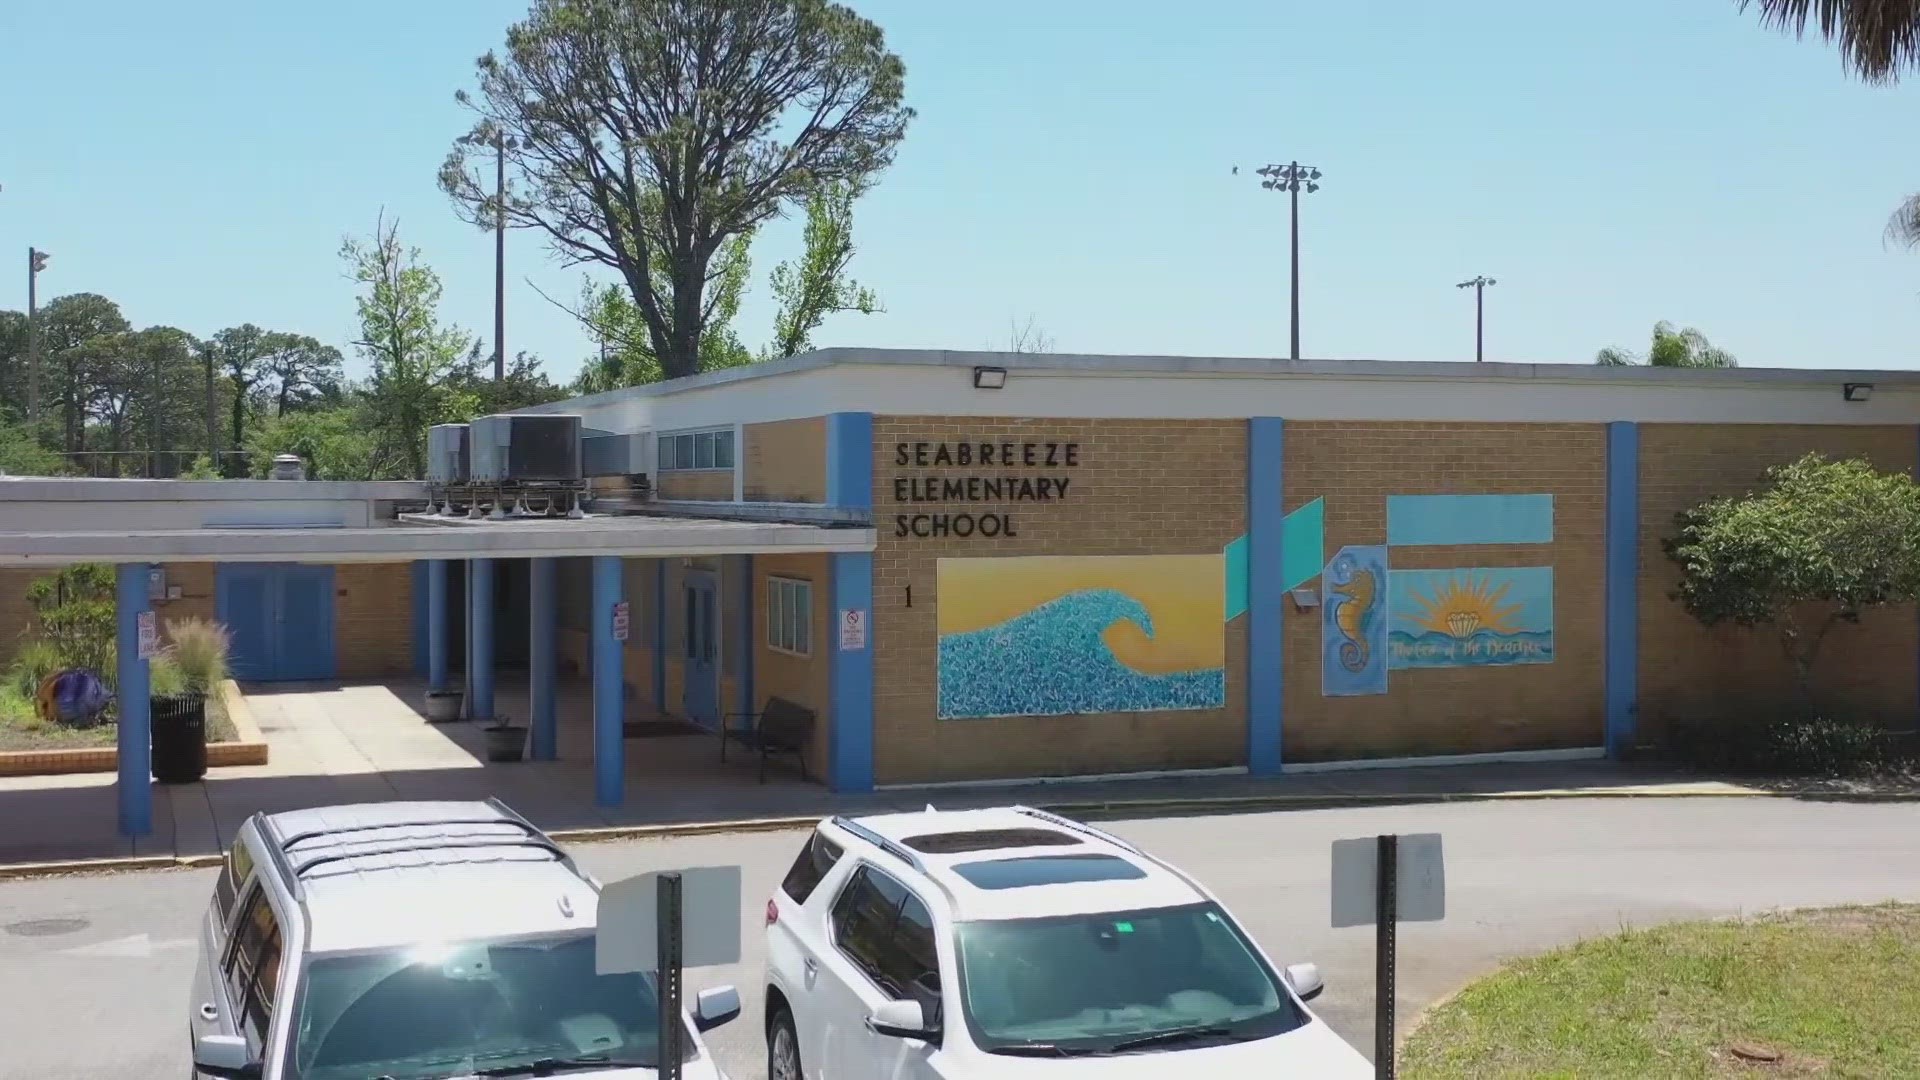 San Pablo Elementary and Seabreeze Elementary are at risk of closing in a proposed consolidation plan.